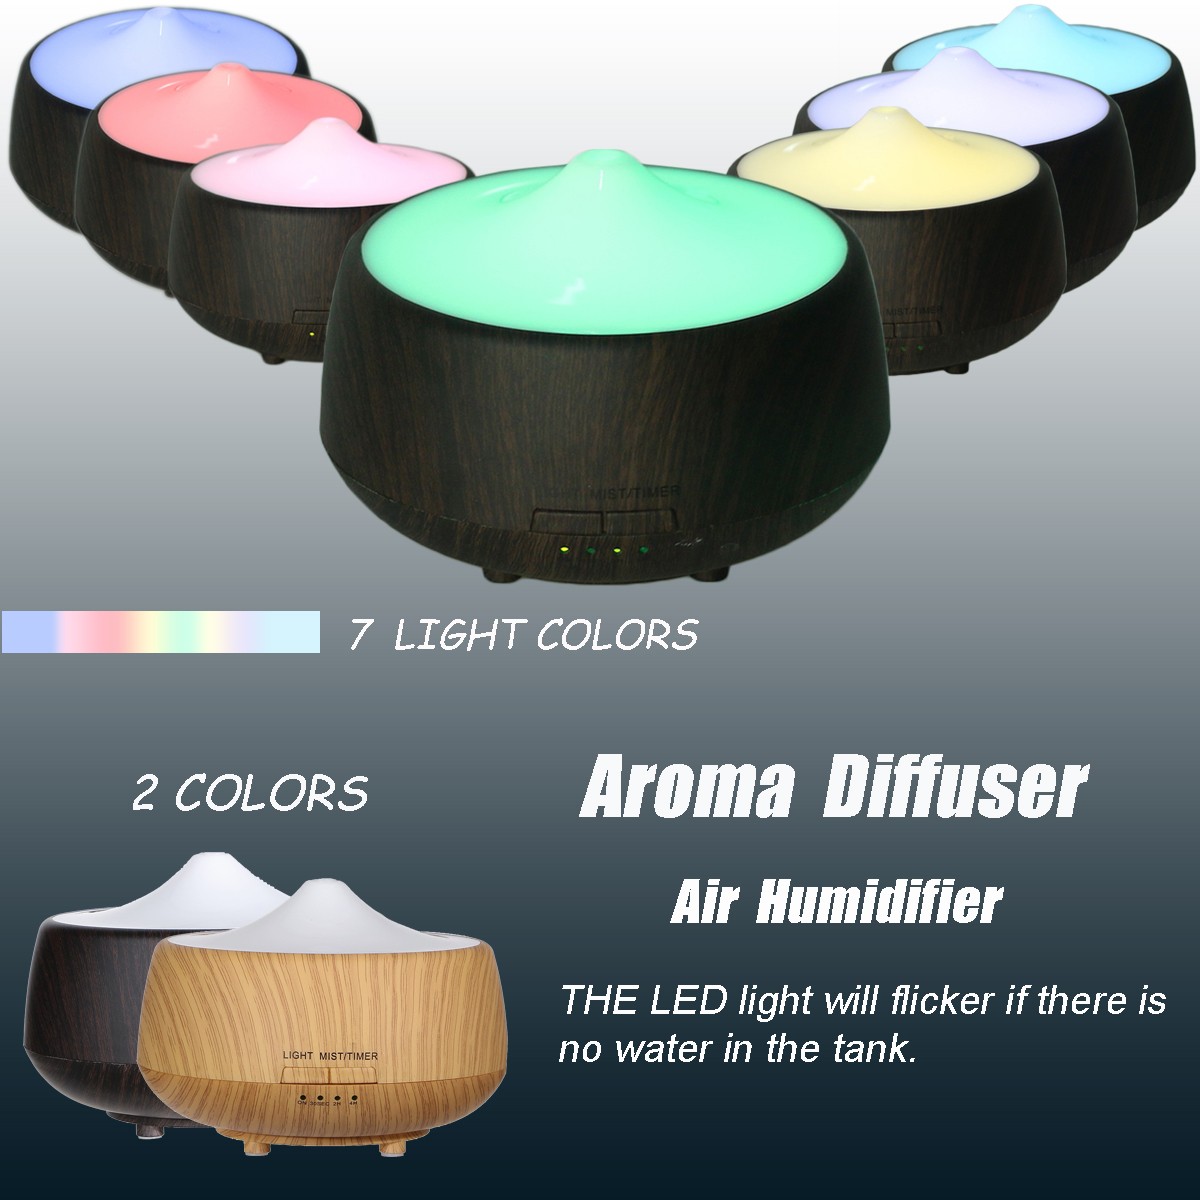 110-240V-7-Color-LED-Ultrasonic-Air-Humidifier-Aroma-Atomizer-Diffuser-Steam-Air-Purifier-1304539-2